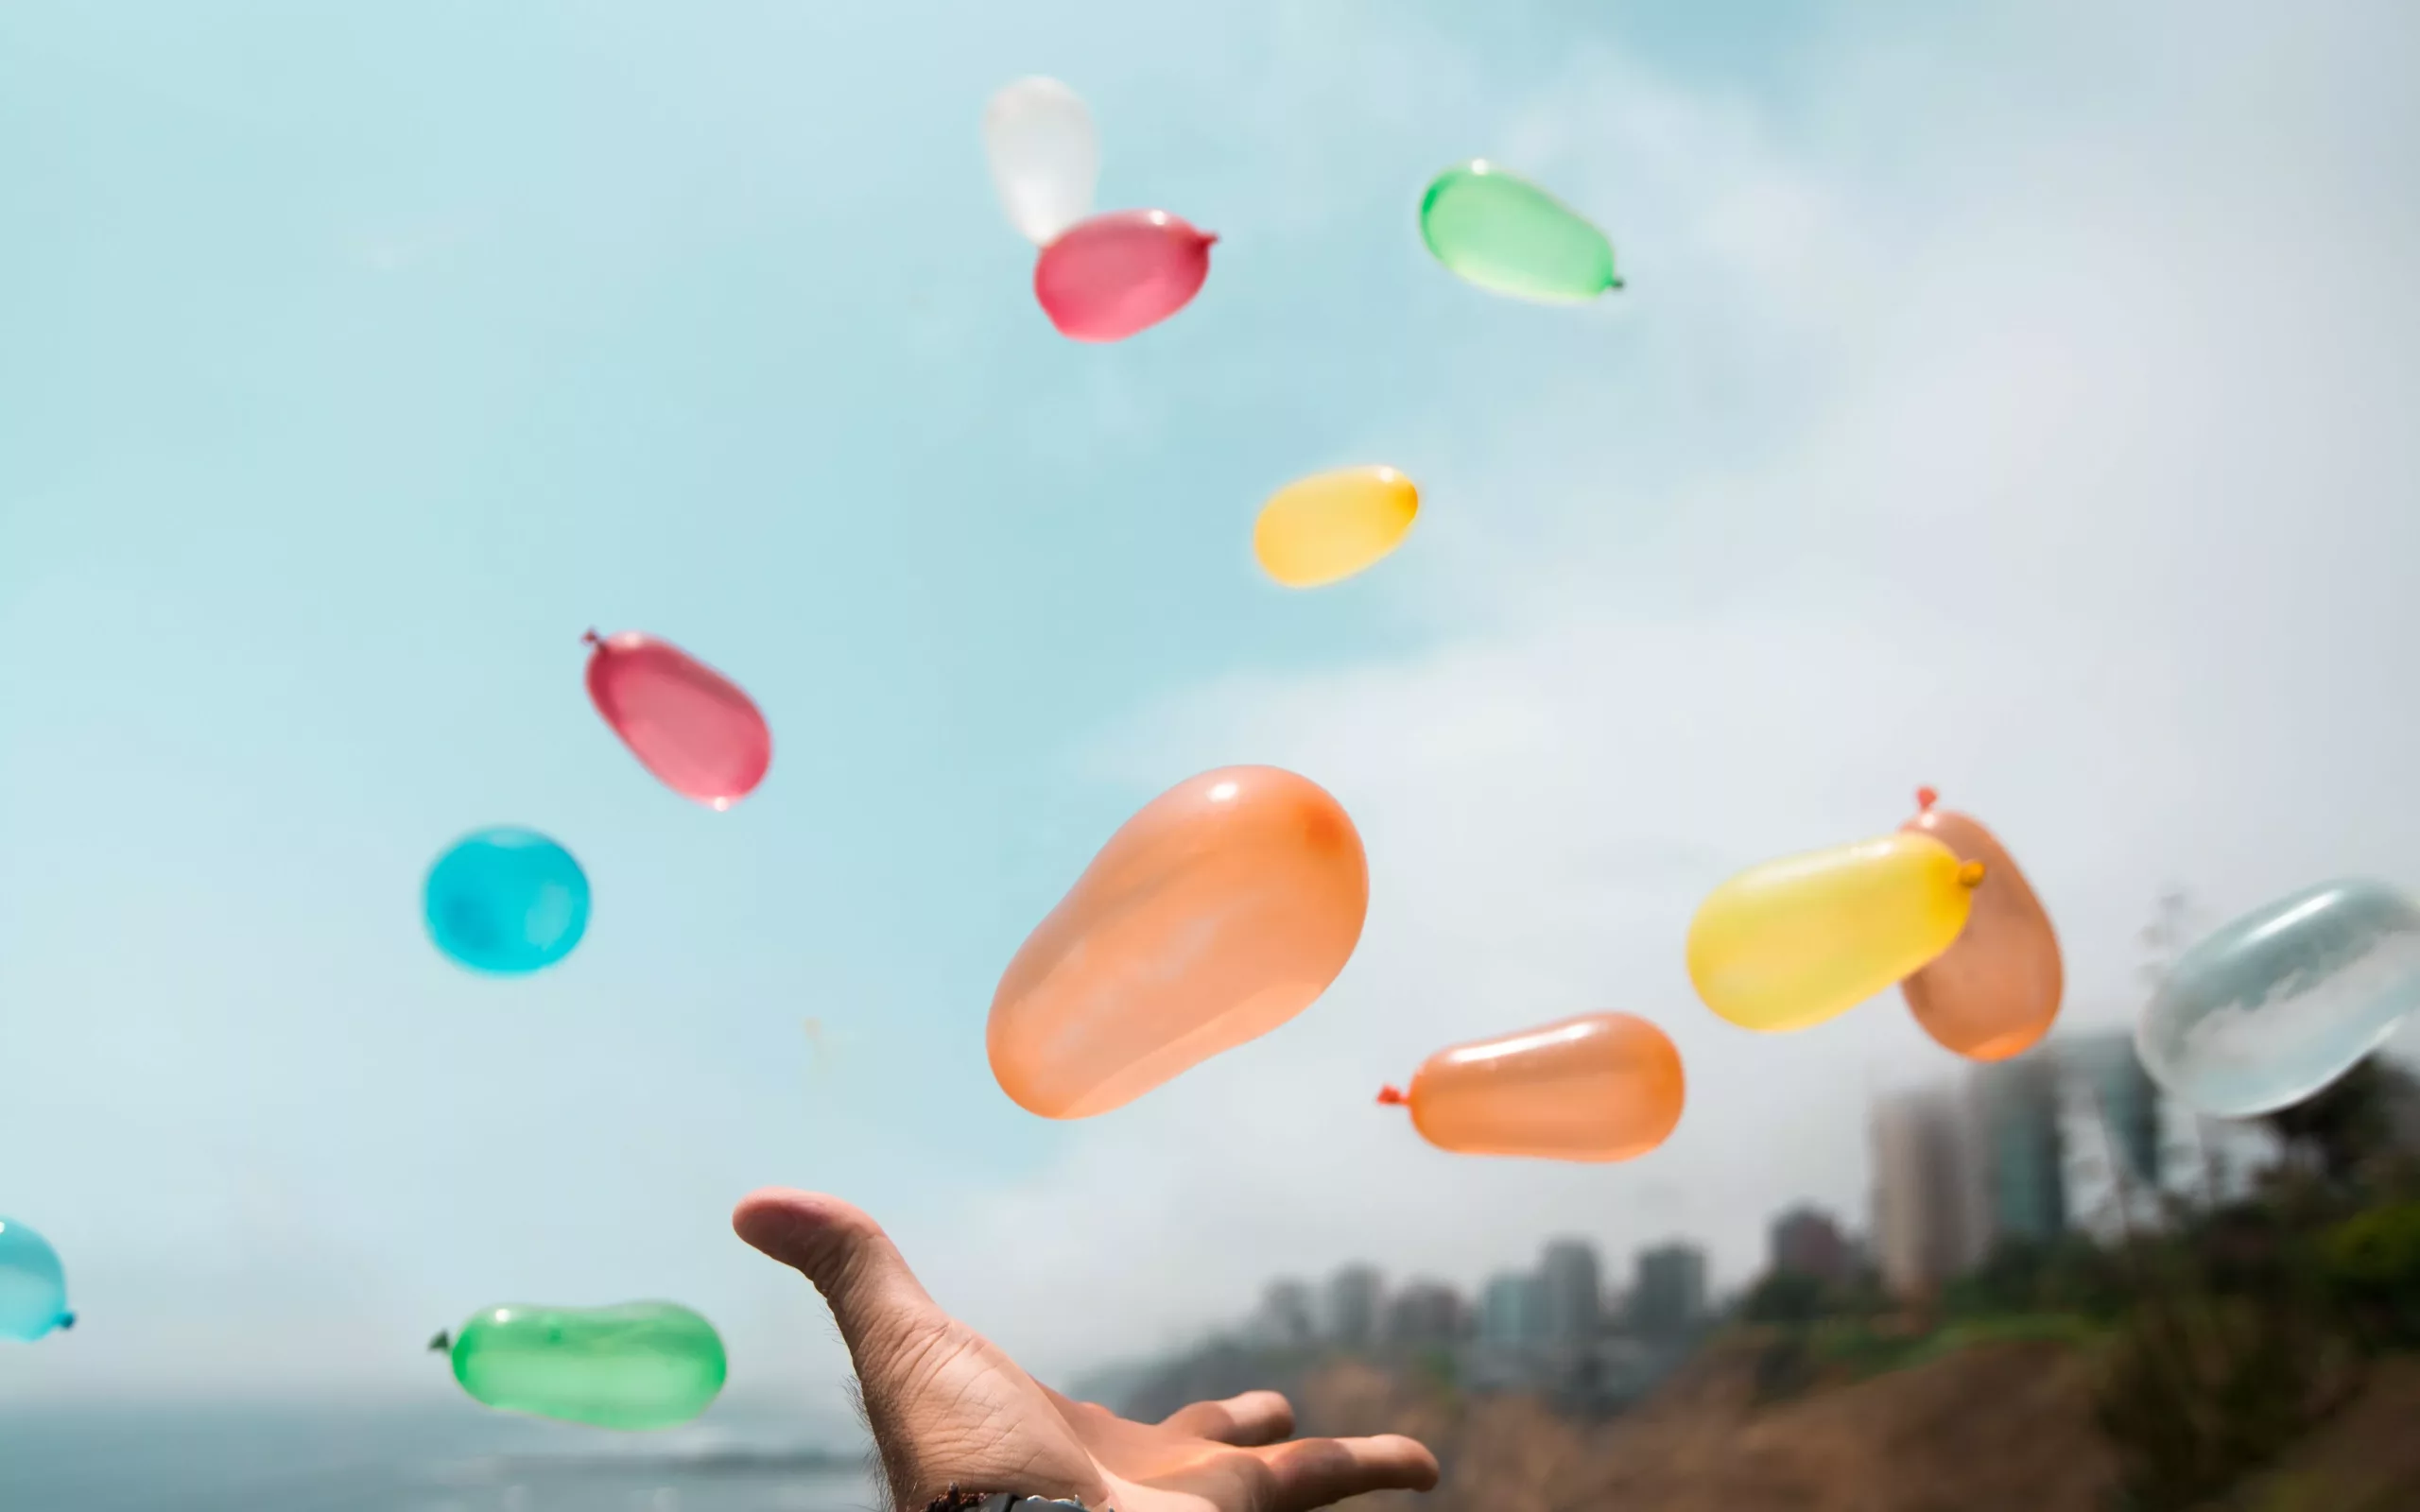 Benefits of using biodegradable water balloons